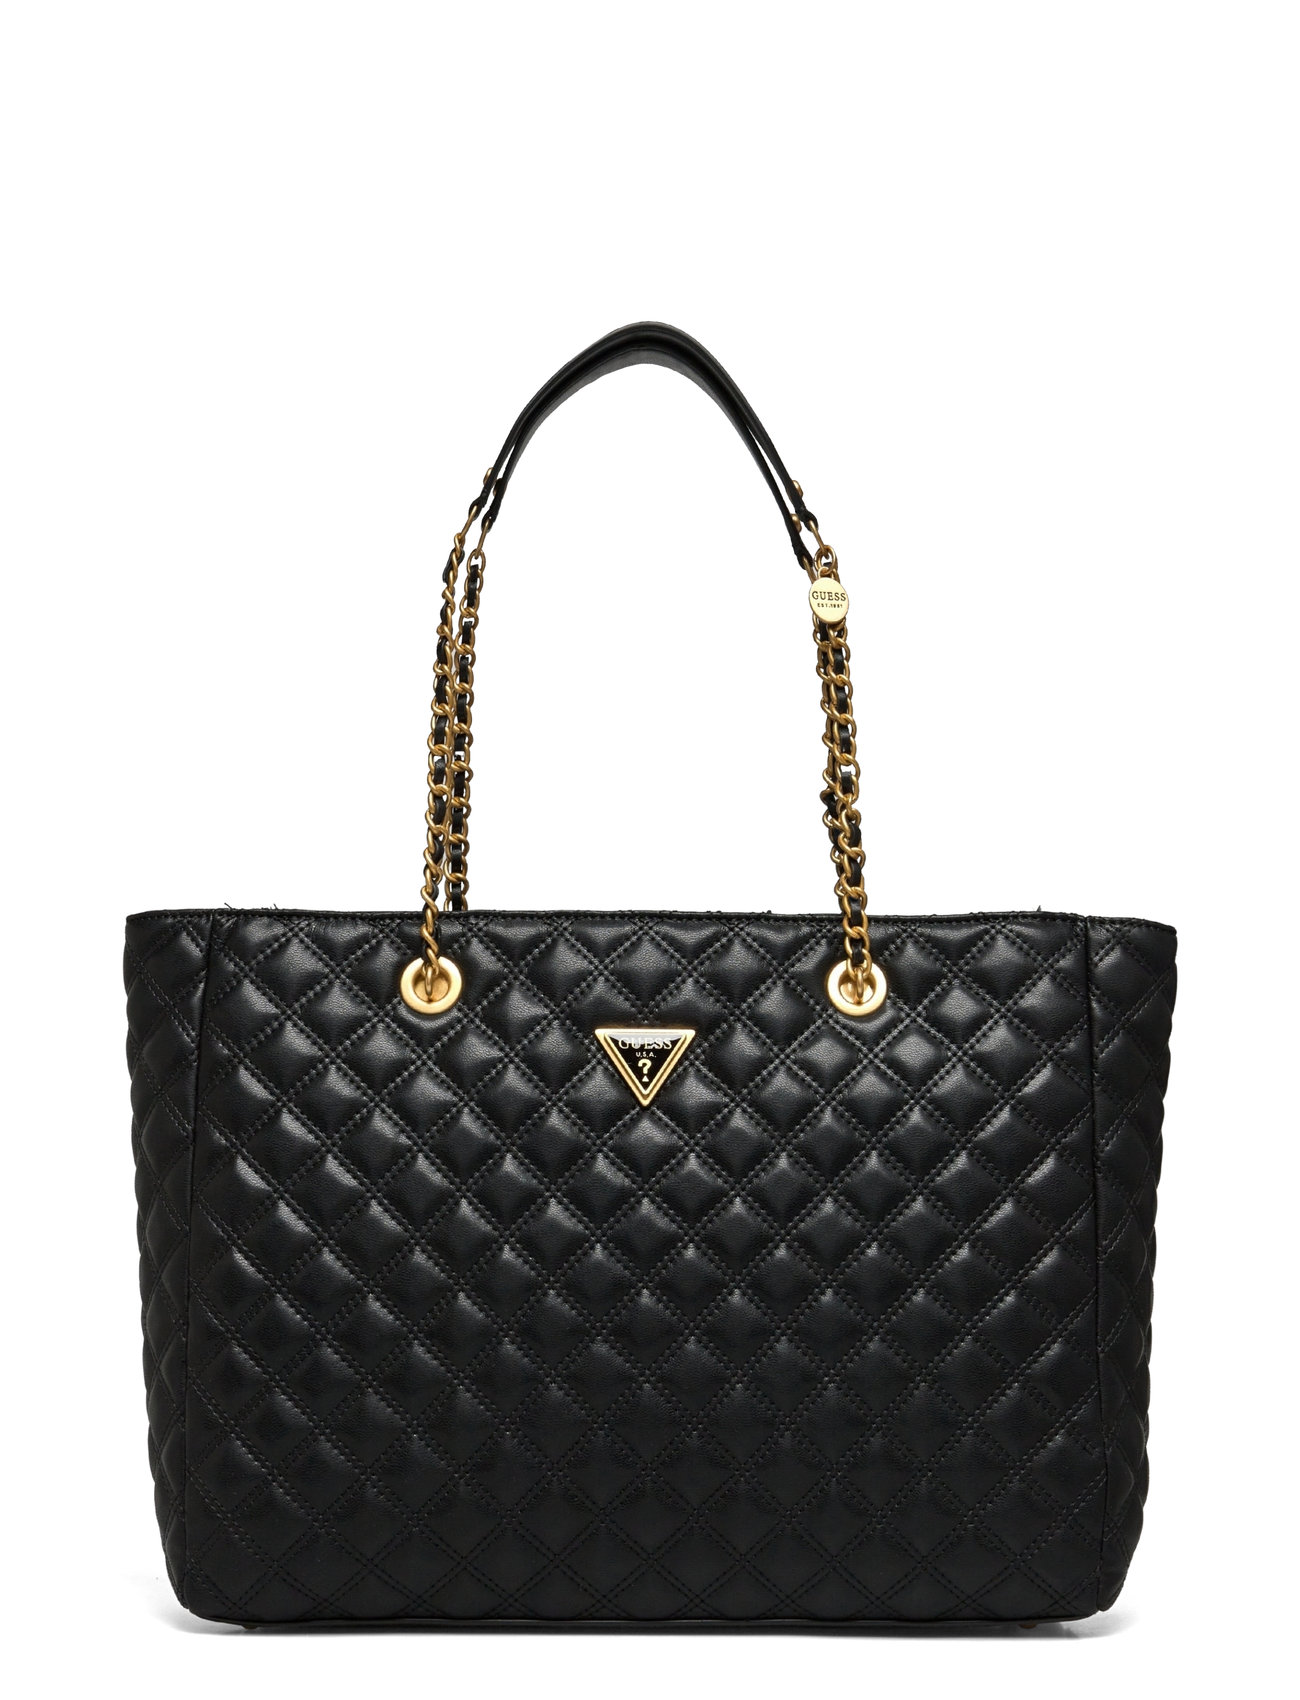 Giully Tote Bags Totes Black GUESS